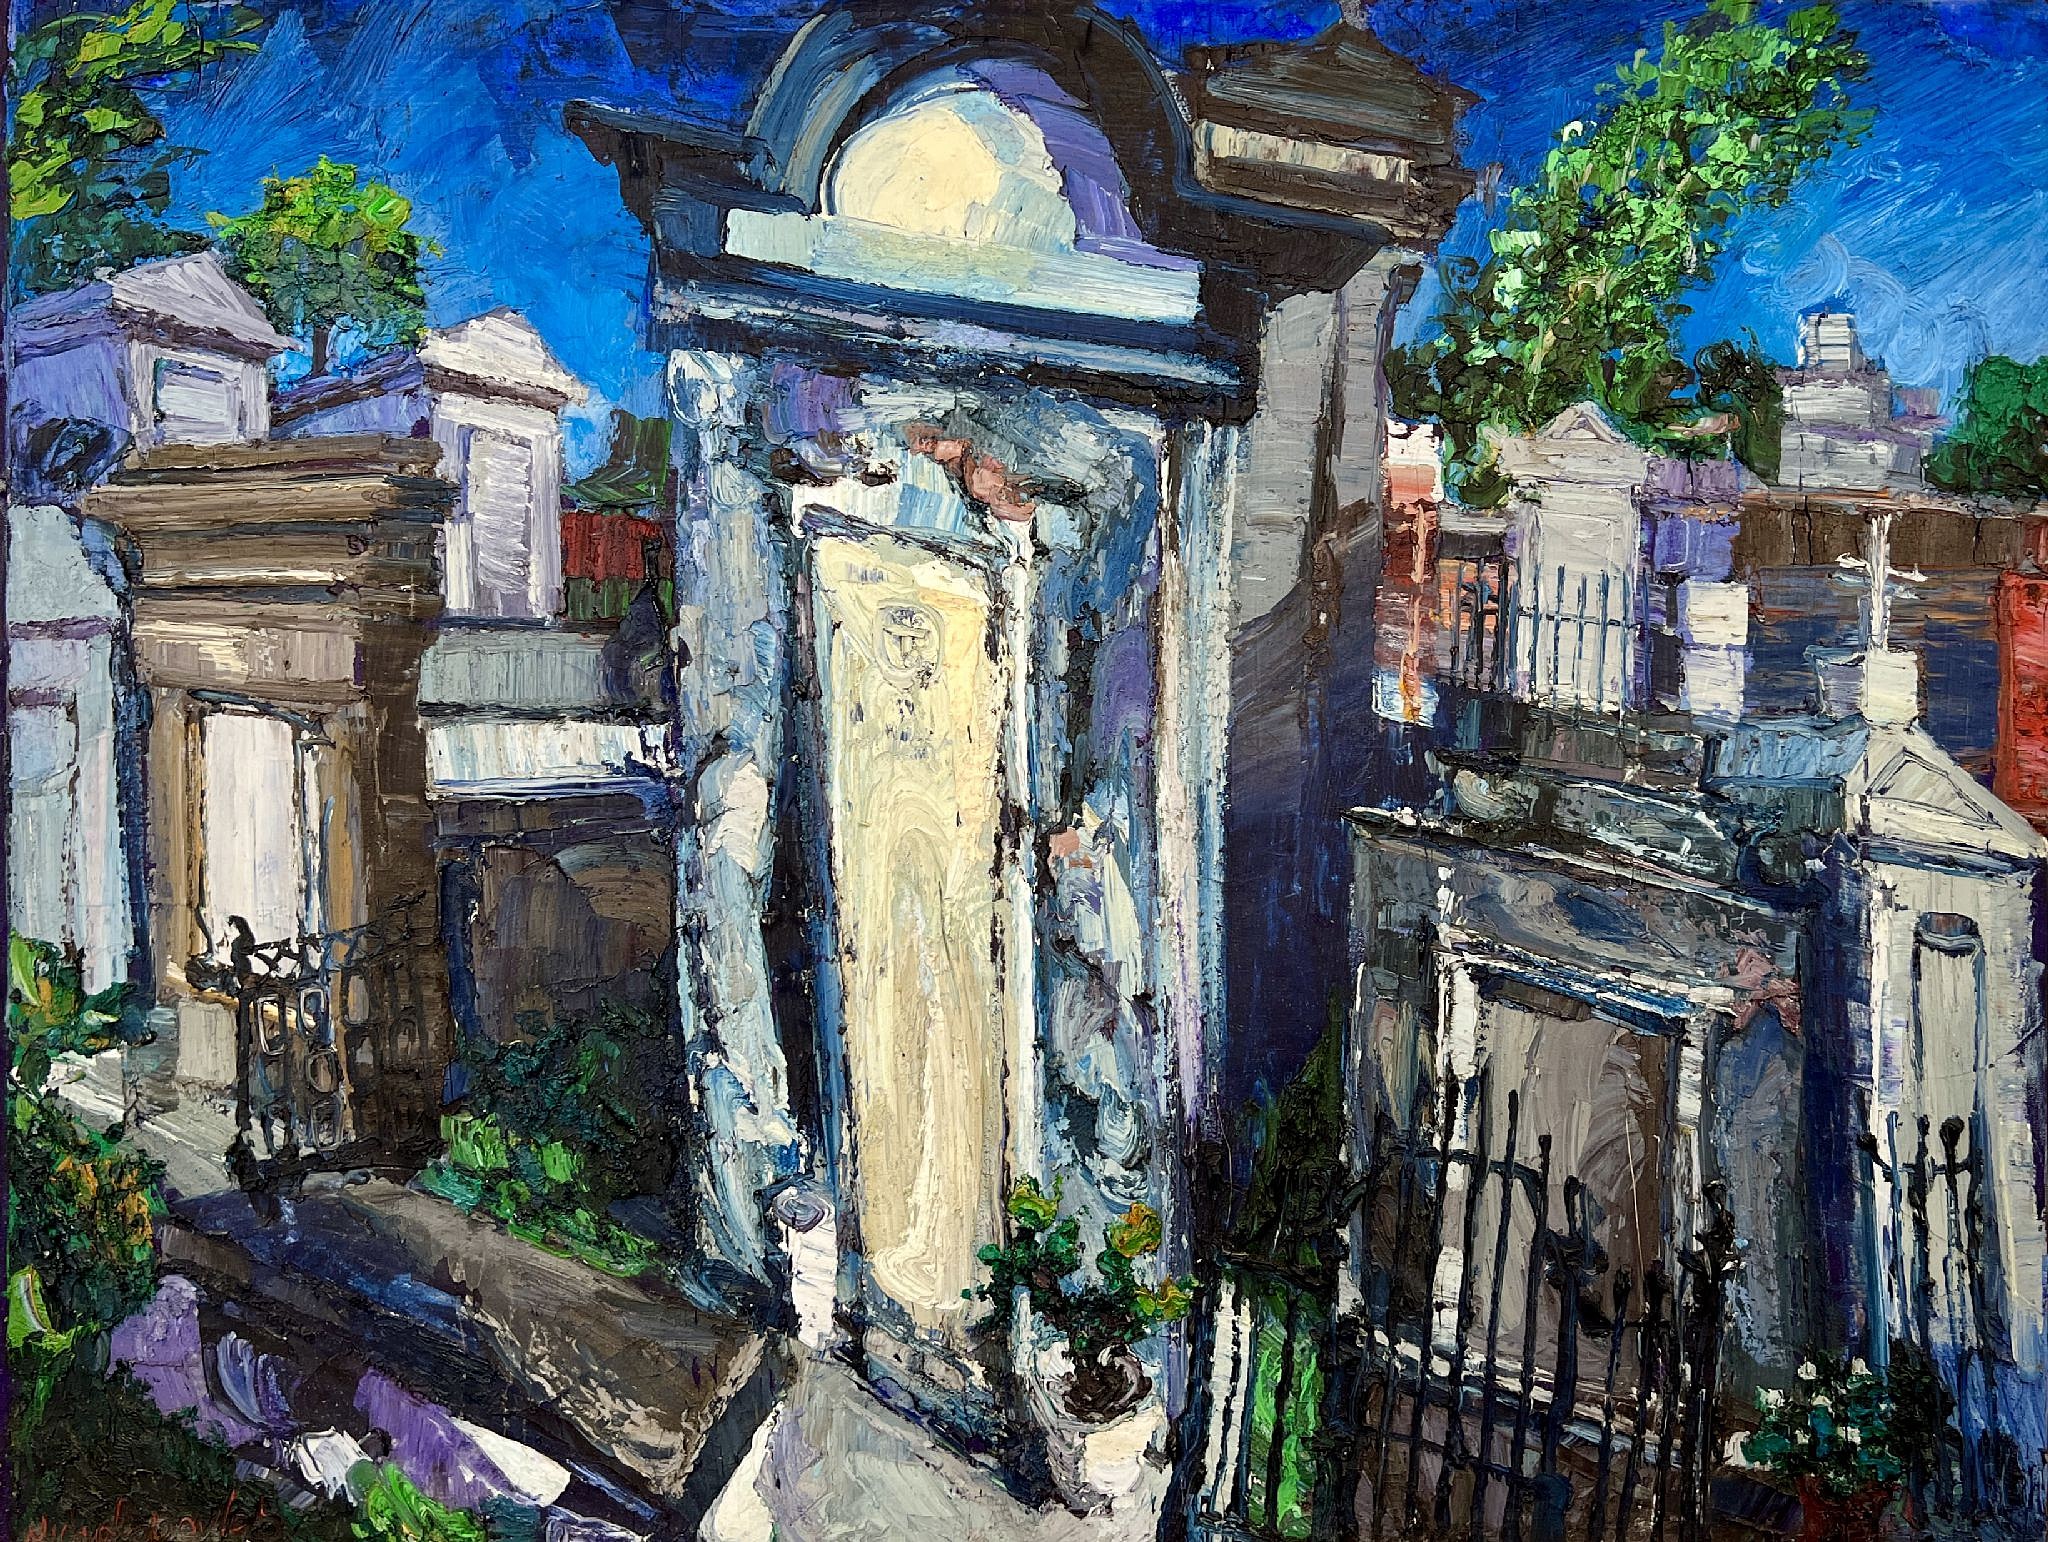 Nowhere are cemeteries more fascinating than in New Orleans. Small cities of the departed. Elegant architectural forms erected to solemnize and honor the deceased. Collectively the tombs become a Cementius Second Line. From the Dead they unselfconsciously "Rock the Box.” 
 - James Michalopoulos